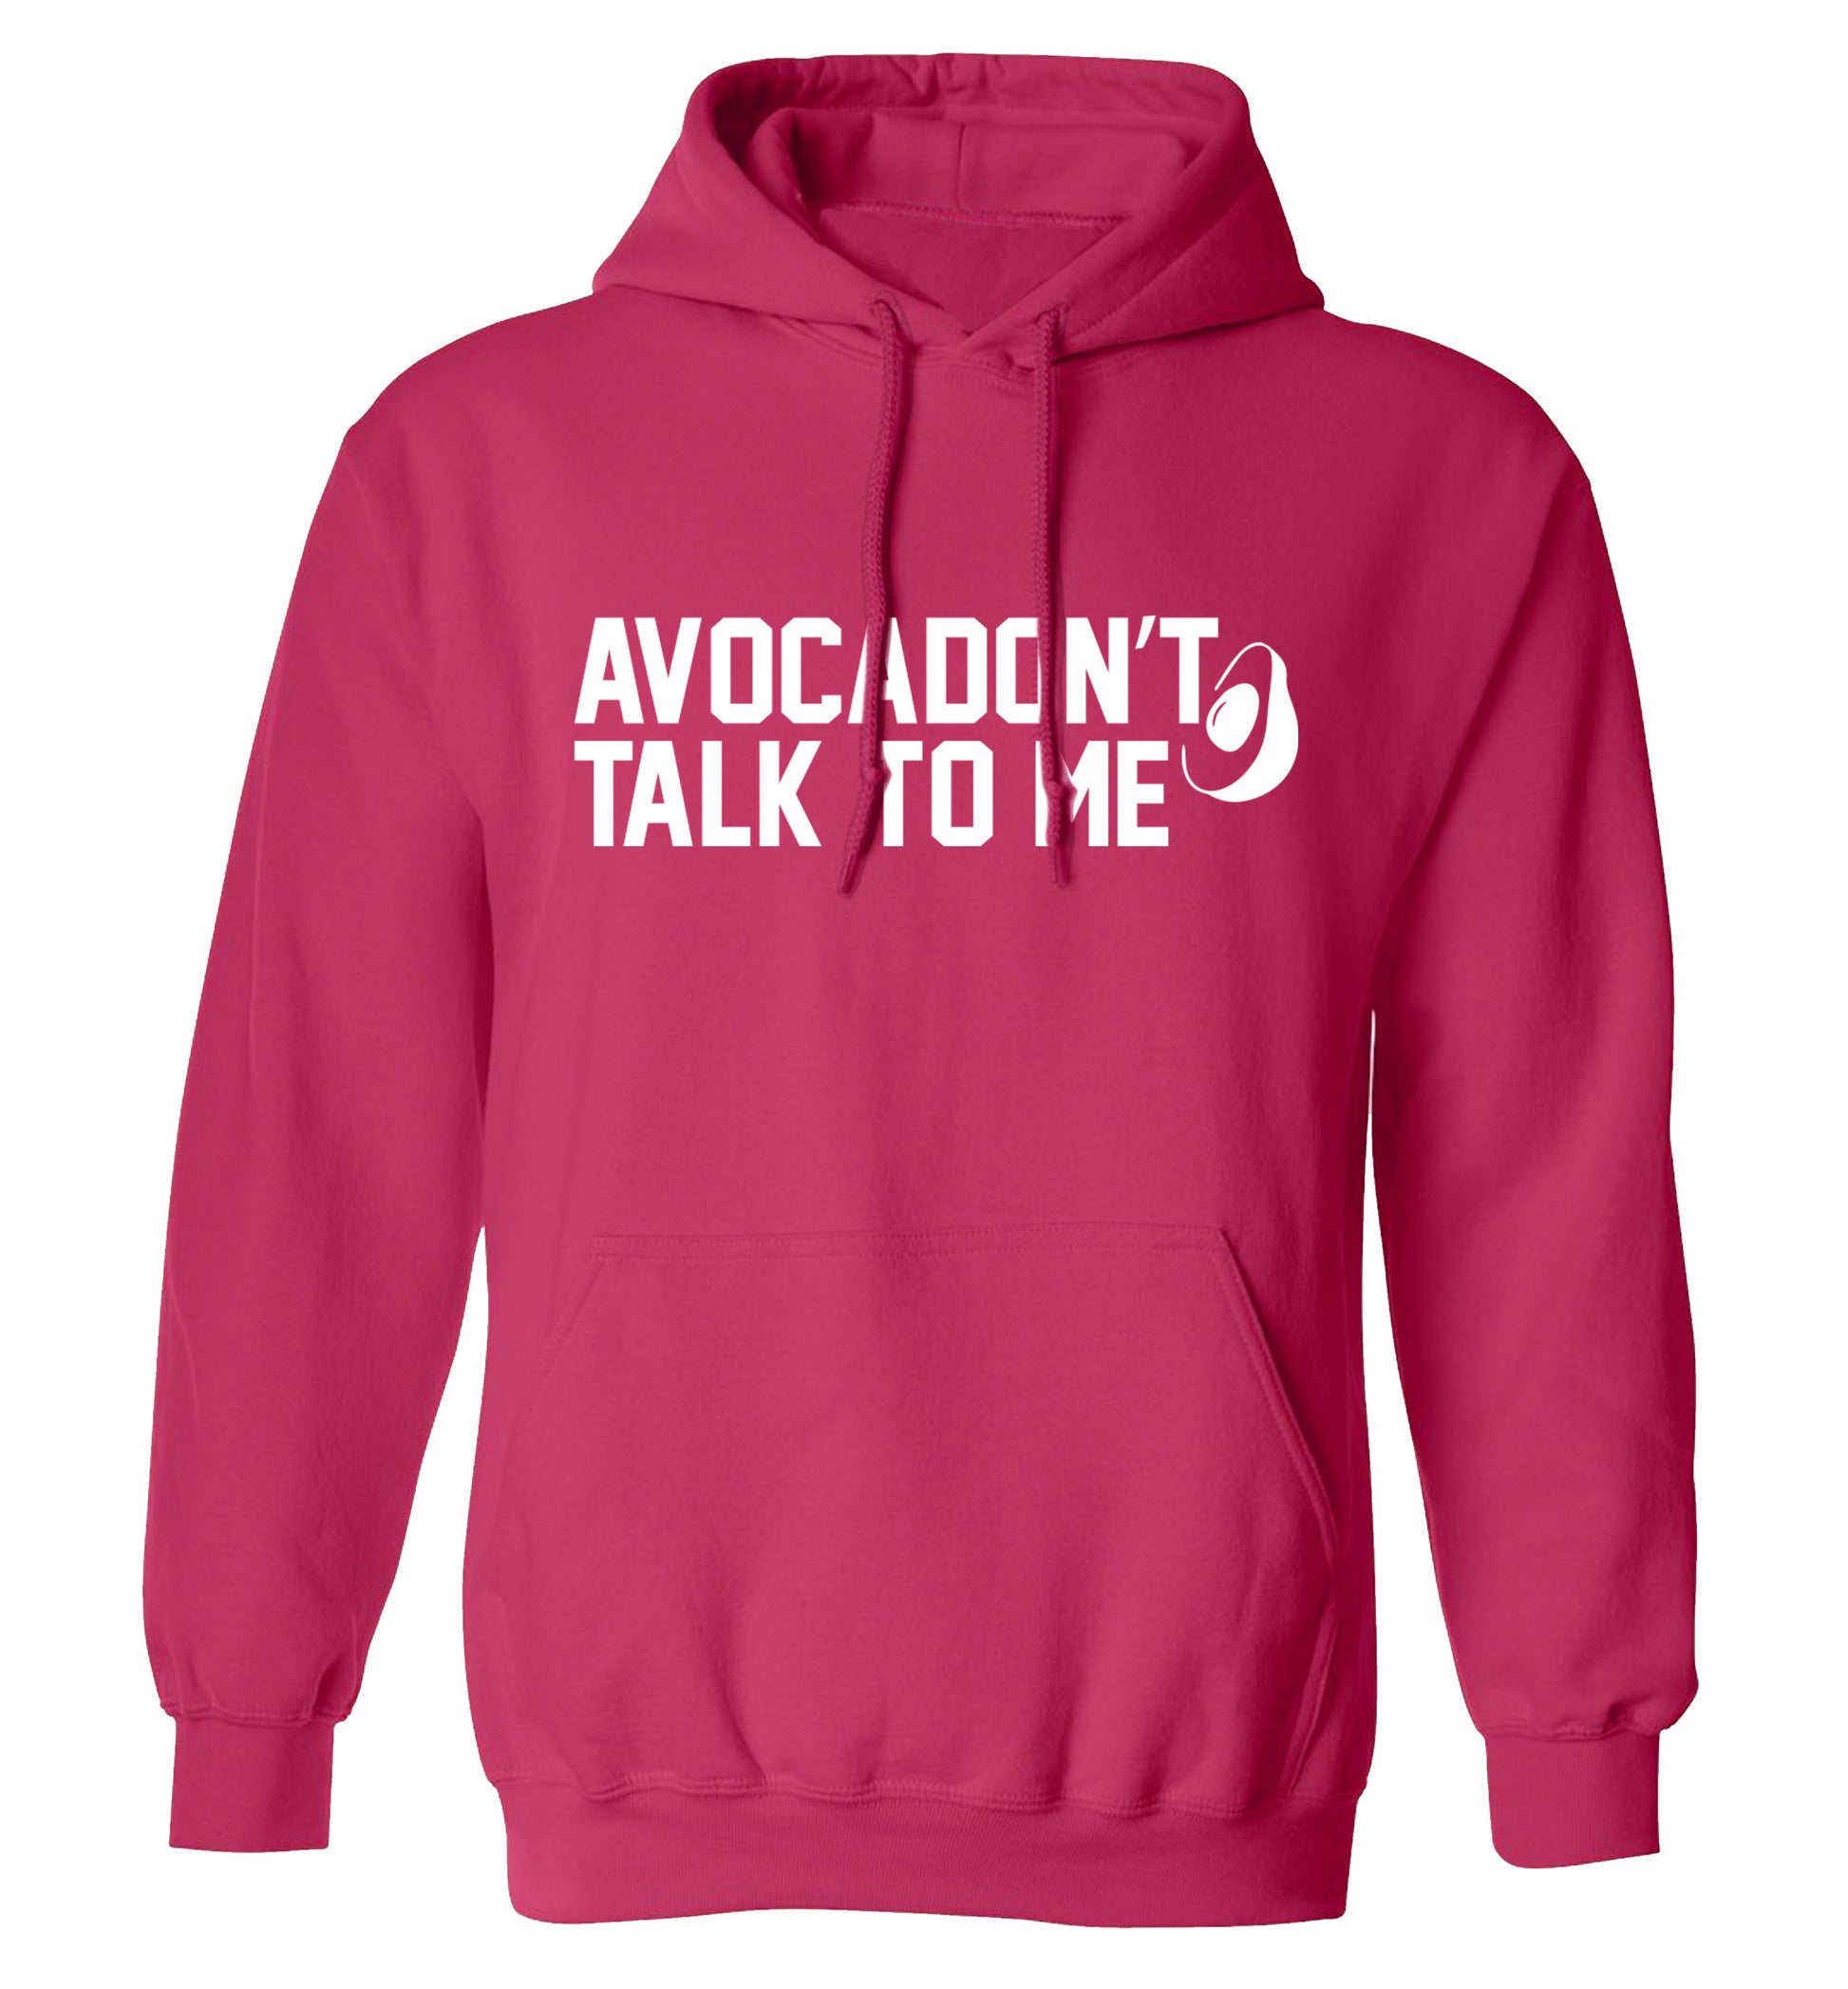 Avocadon't talk to me adults unisex pink hoodie 2XL